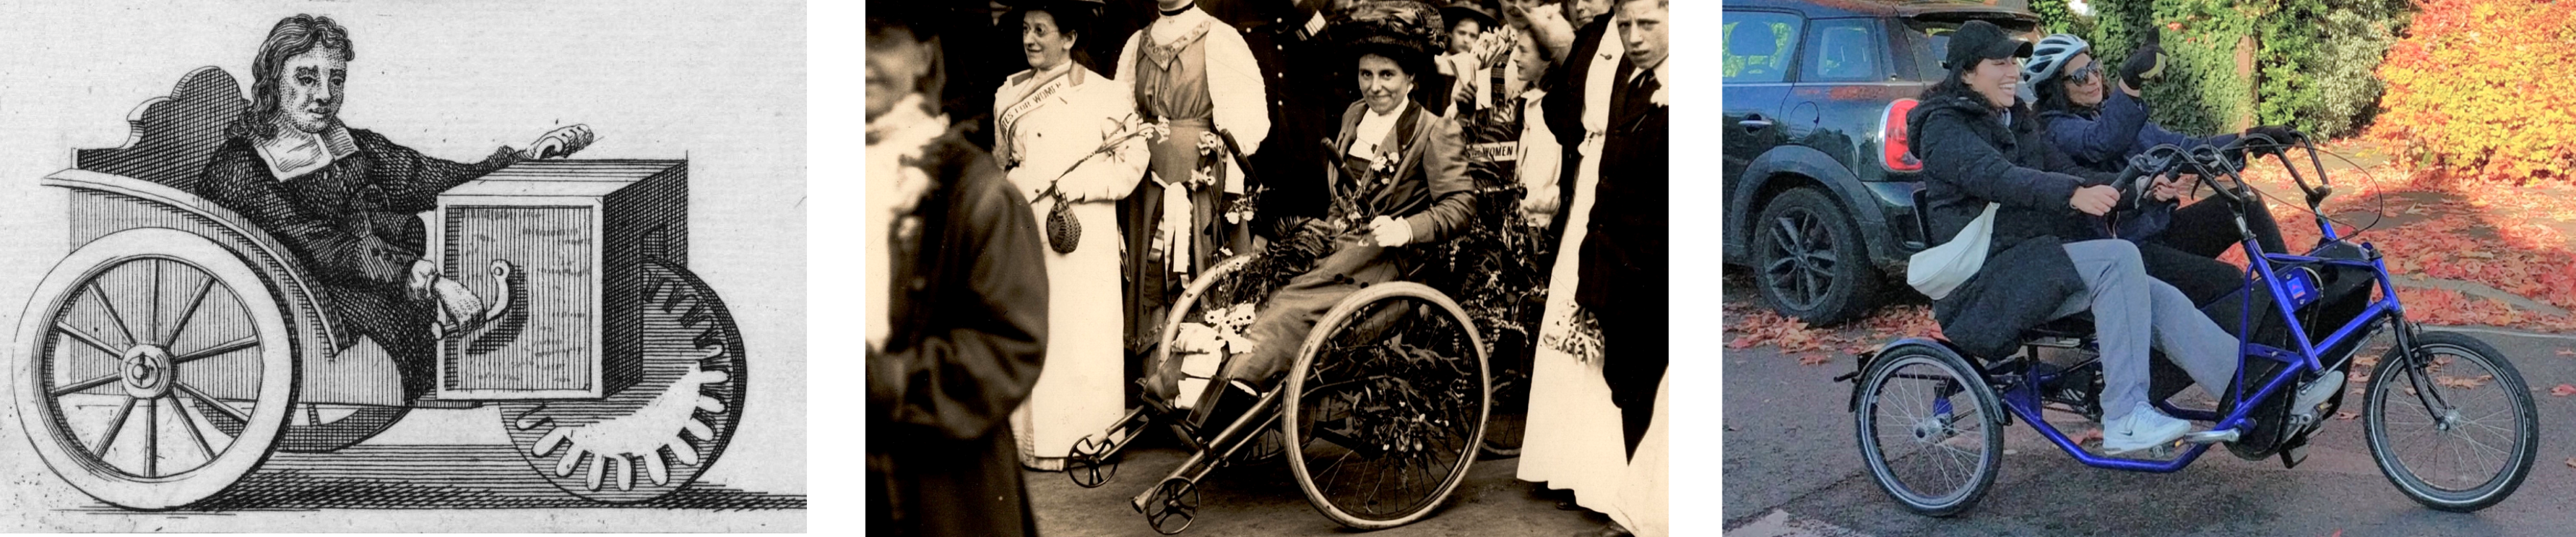 Three photos of cyclists, from left to right:
Woodcut image of Stephan Farffler, a man riding a wooden handcycle from the 18th century.
Rosa May Billinghurst, a woman riding a wheelchair-style handcycle tricycle at a Suffragettes event in the early 20th century;
Two smiling women riding a side-by-side tricycle on a road in 2023.